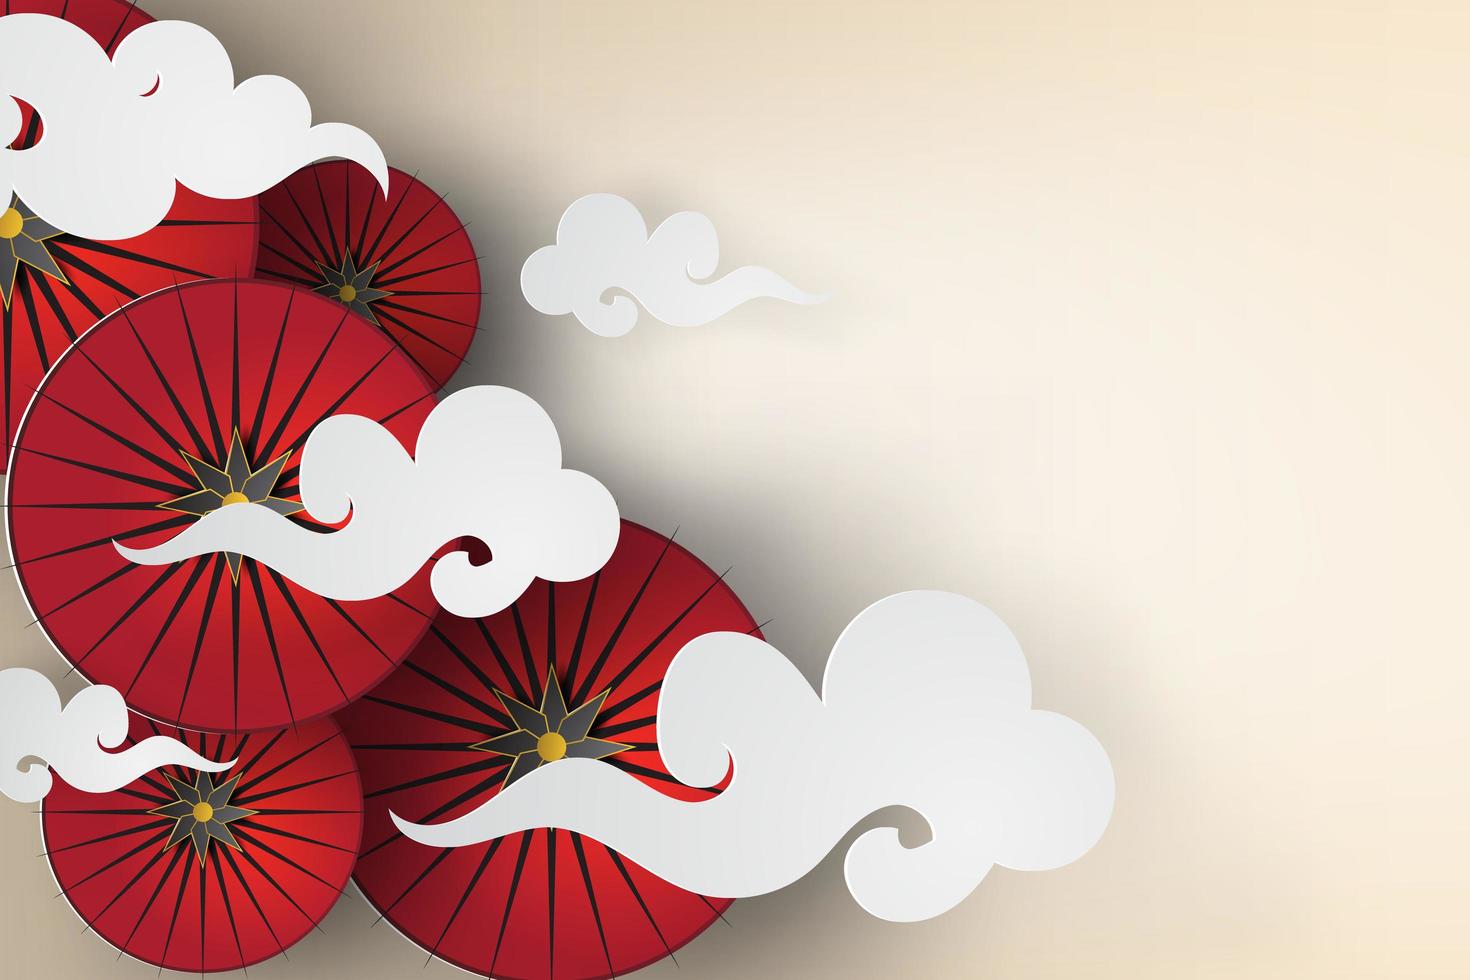 Red Japanese Umbrellas with Clouds Paper Art Design  vector